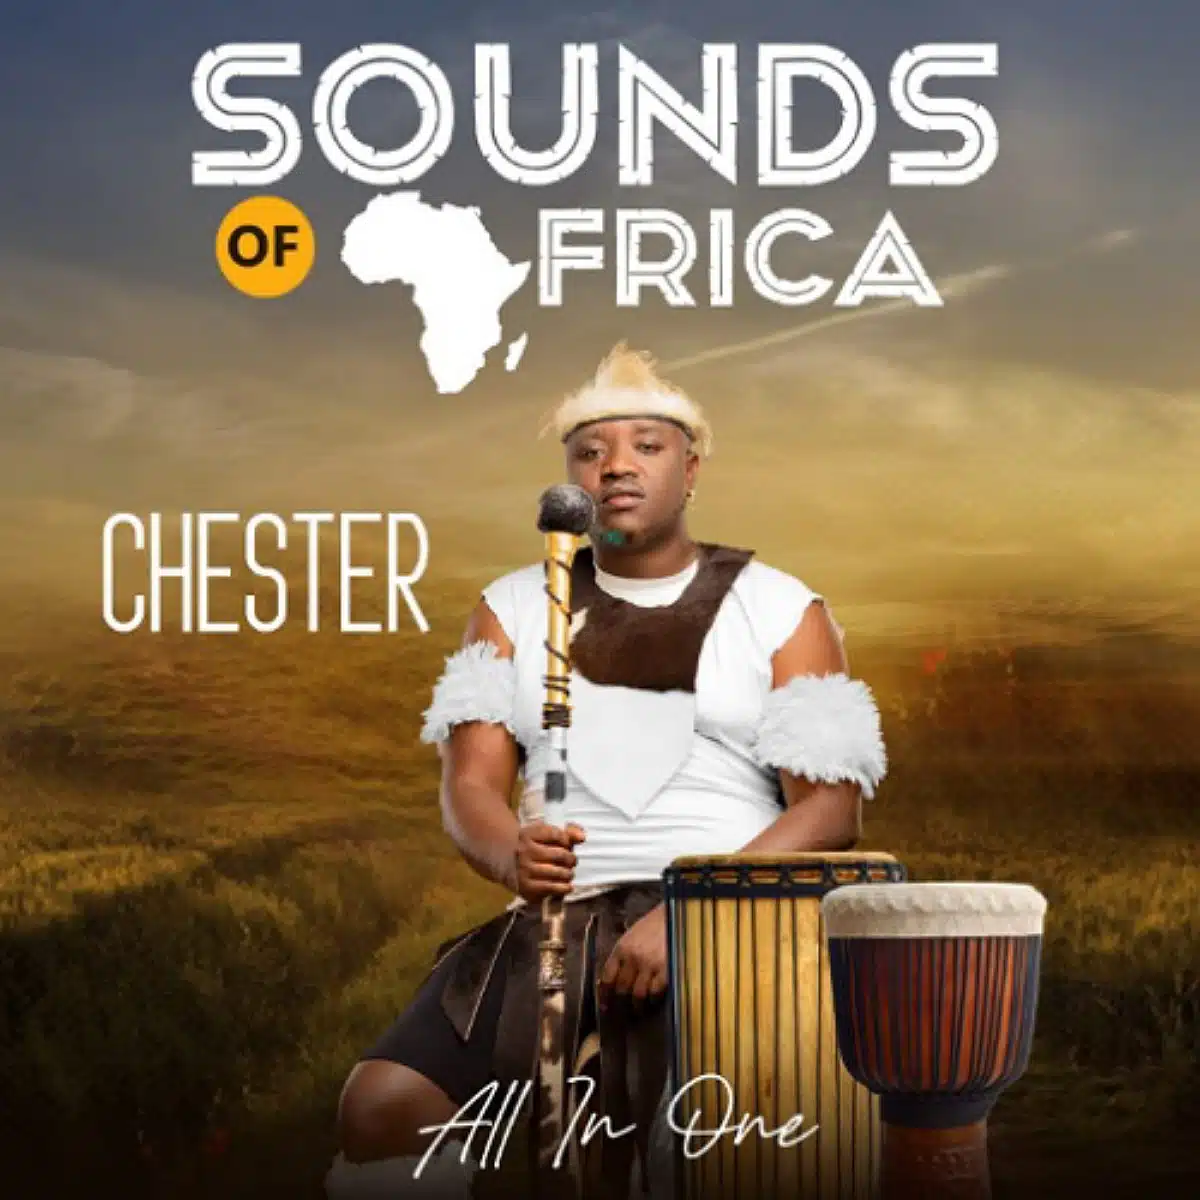 DOWNLOAD: Chester – “Sounds Of Africa” Mp3